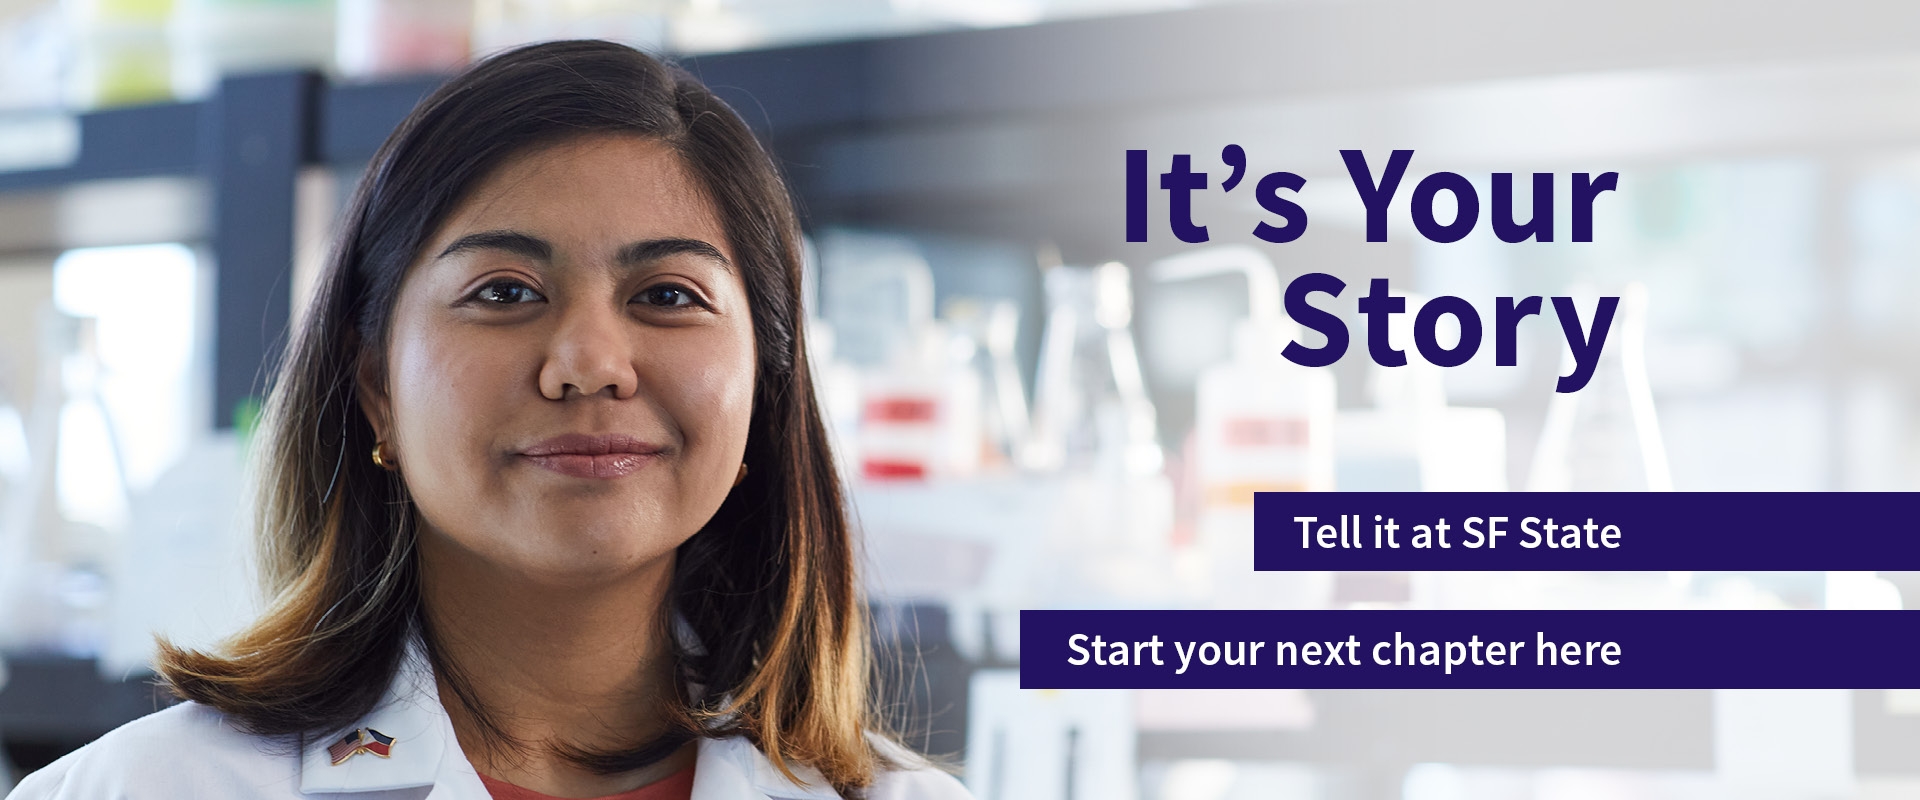 It's Your Story - Tell it at SF State. Start your next chapter here